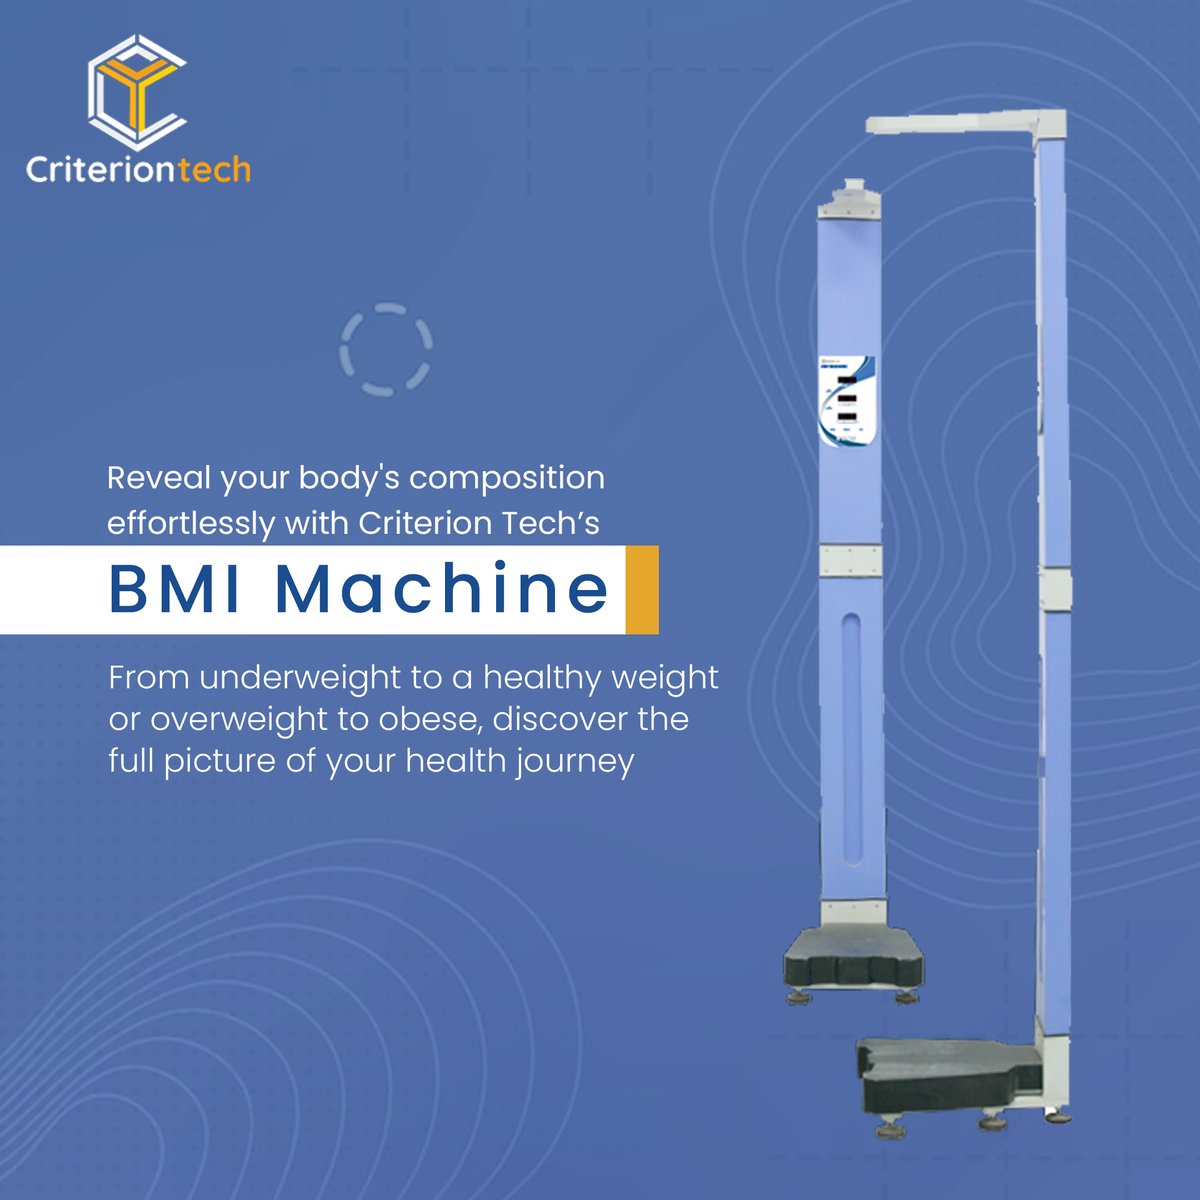 Uncover your body's composition and start your journey towards a healthier, happier you.

Learn more at: criteriontechnologies.com/bmi-machine.ht…
.
#BodyComposition #HealthWellness #BMIAnalysis #BodyComposition #HealthJourney #HealthCheck #WellnessJourney #Criteria4Technology #CriterionTech